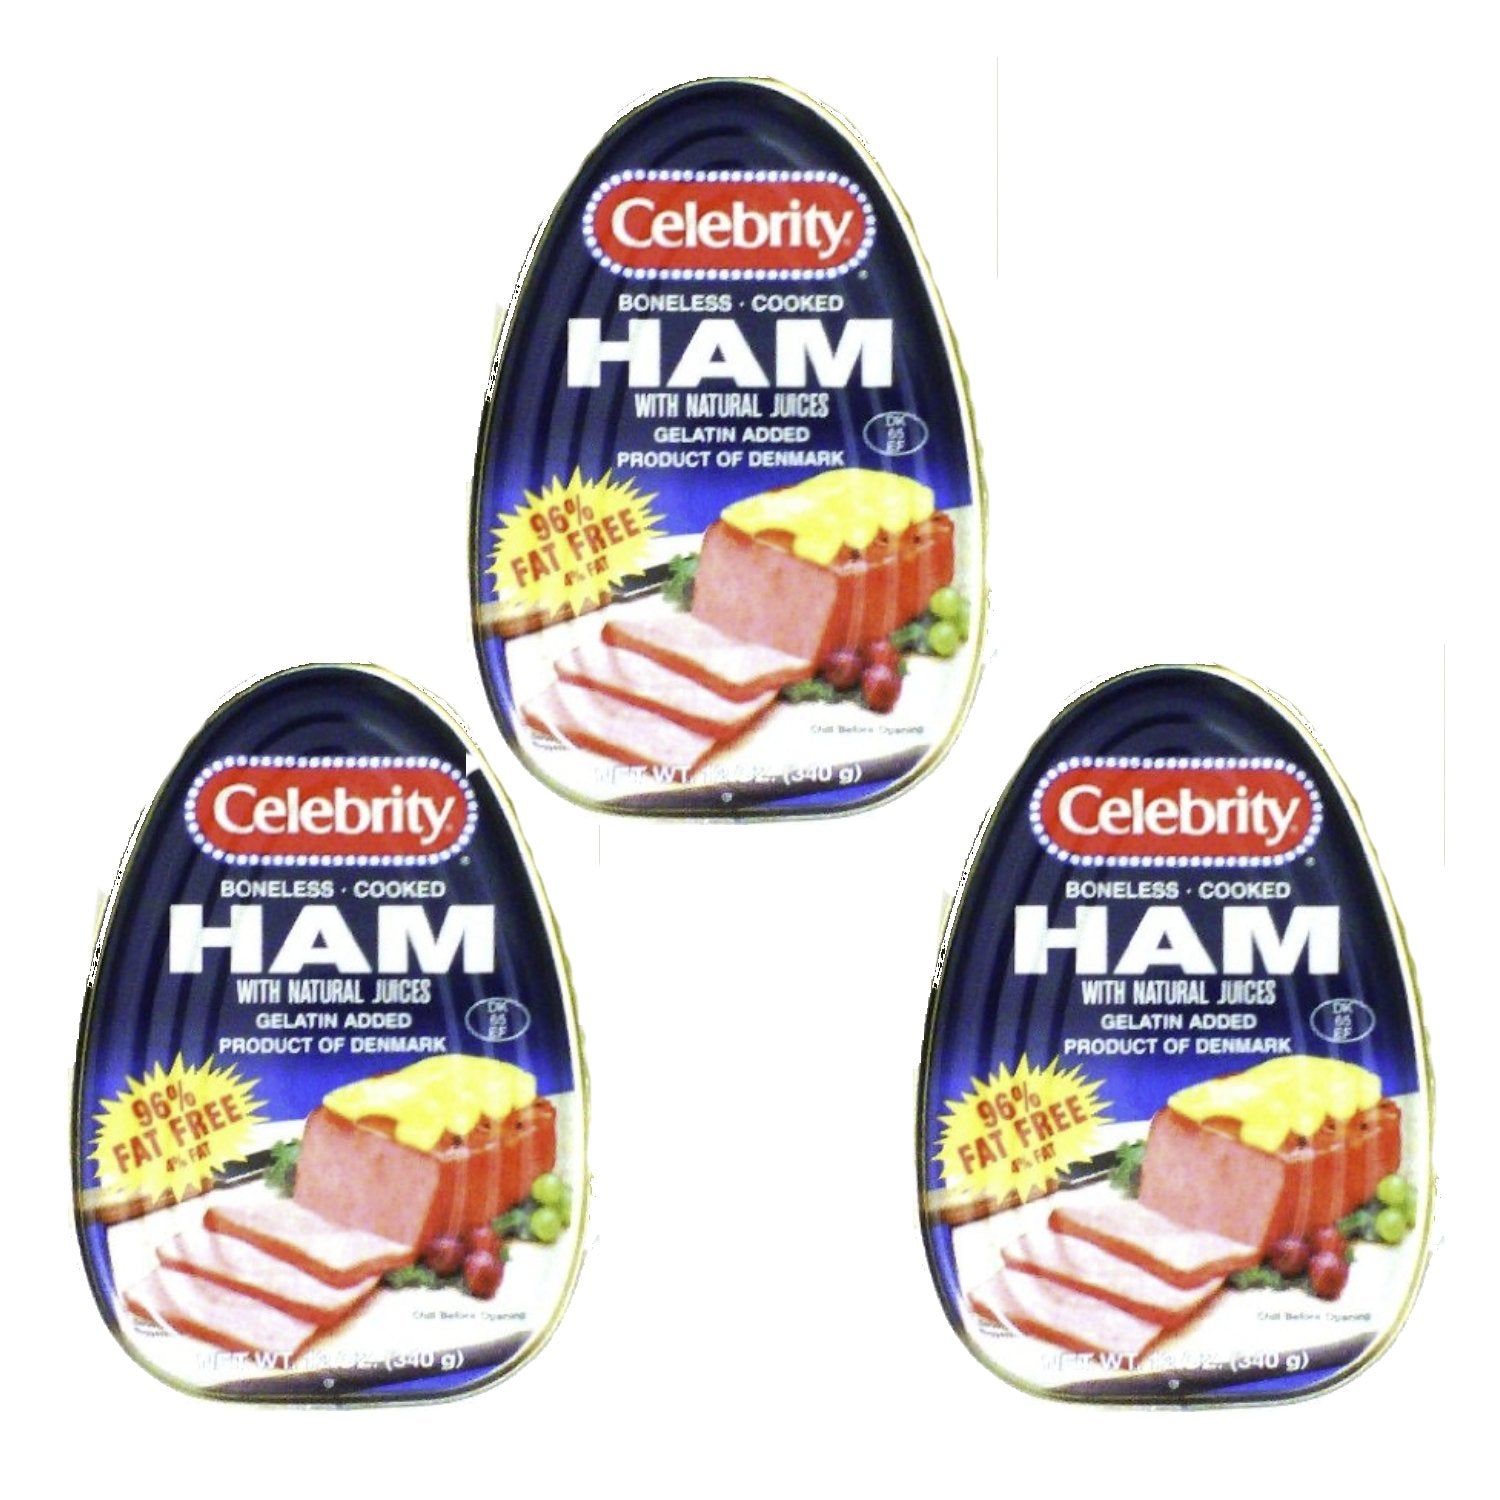 CELEBRITY HAM COOKED CANNED BONELESS PRODUCT OF DENMARK 12 OZ (Pack of 3)